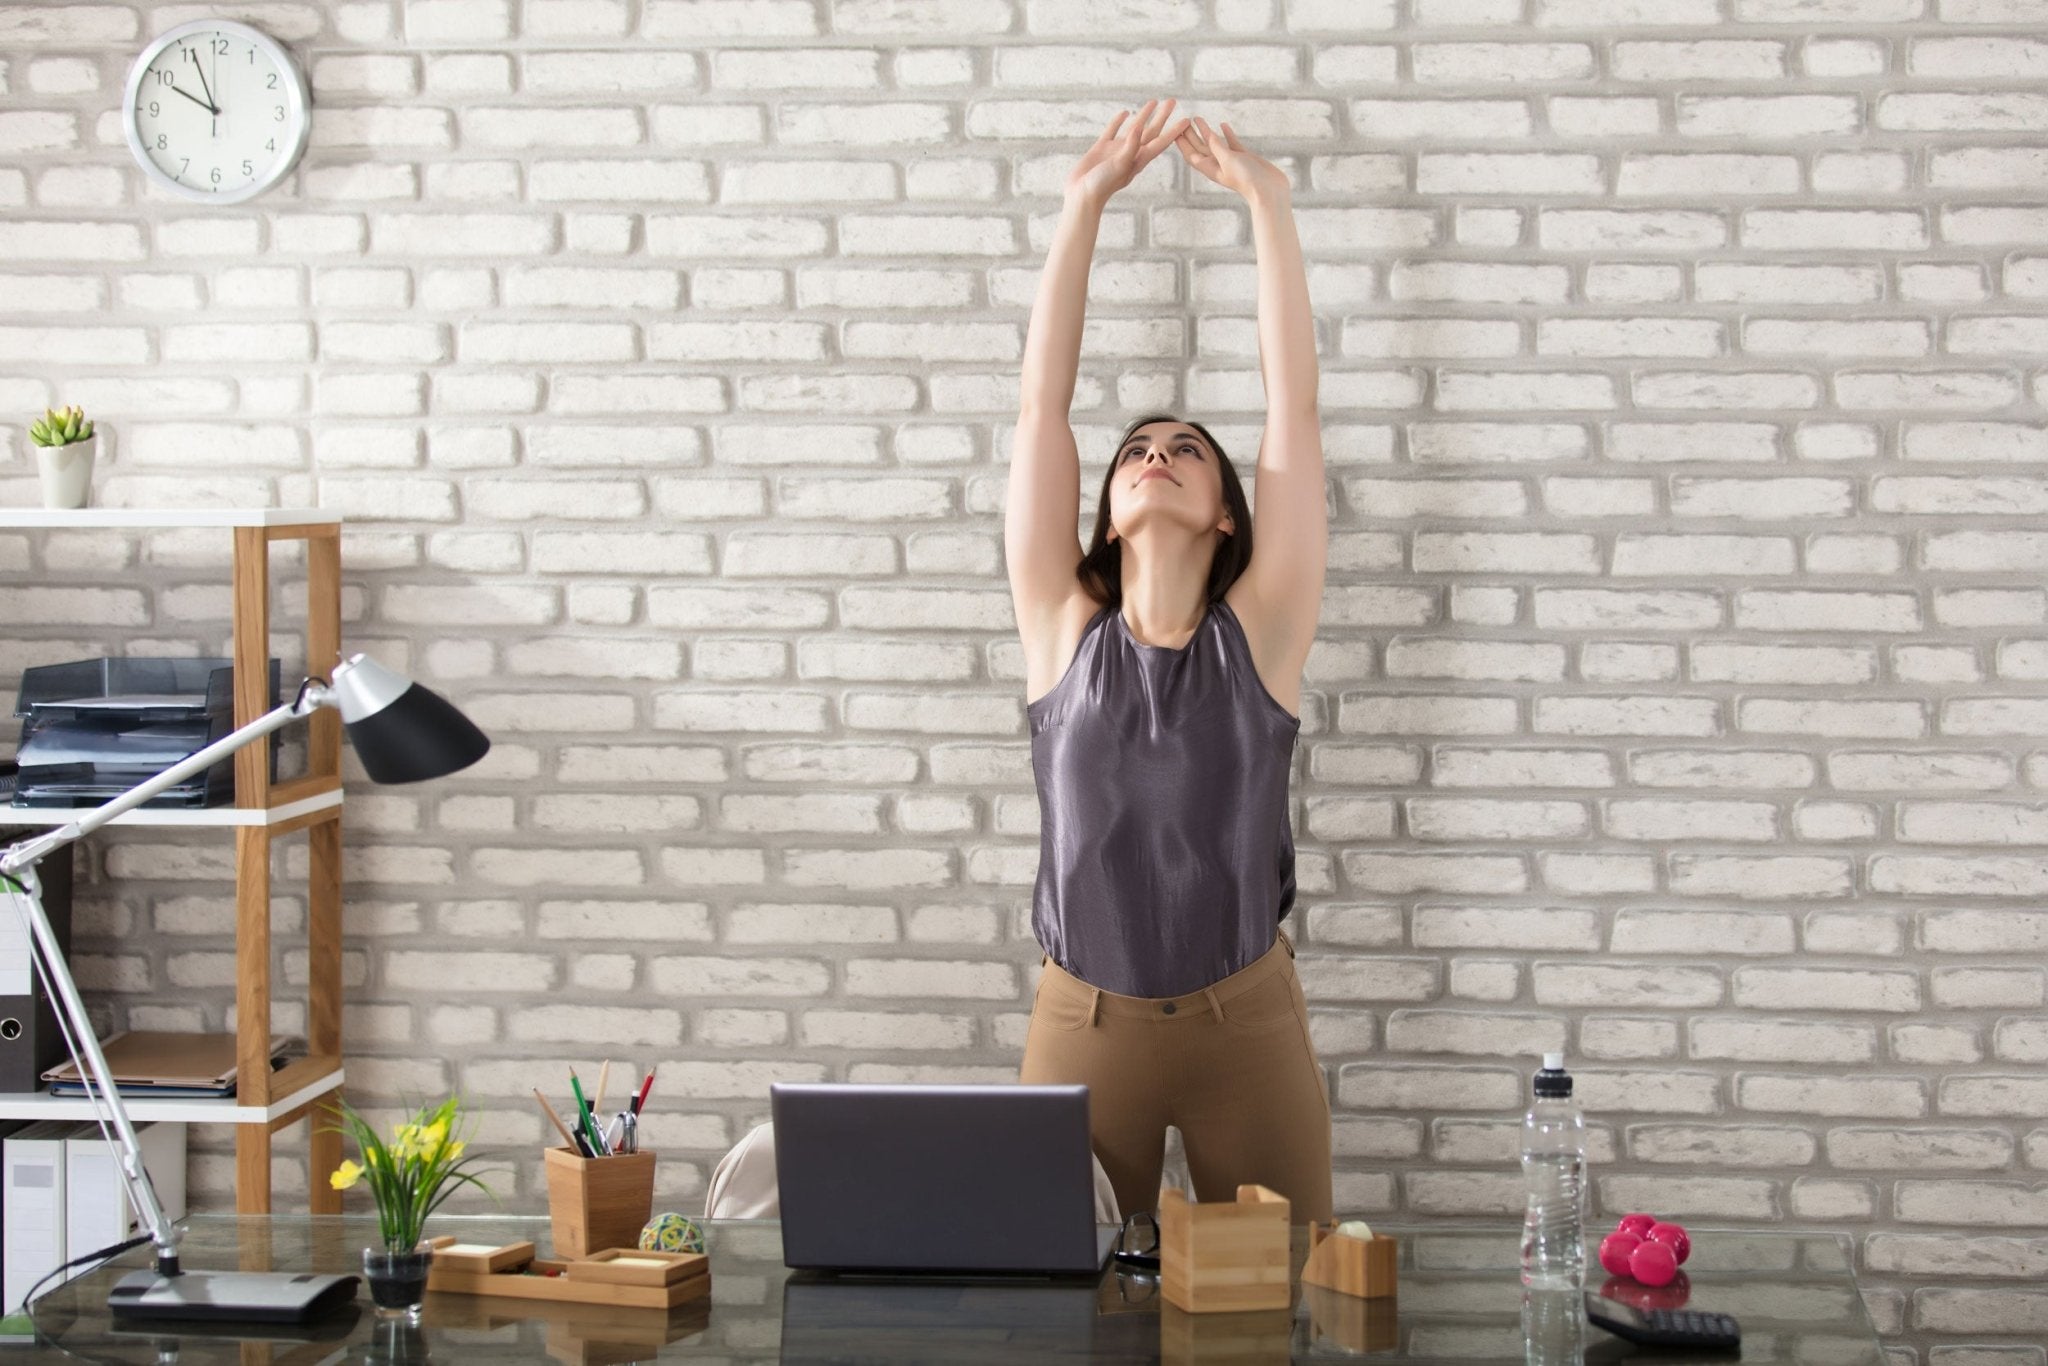 10 Tips on How to Burn Calories at Work - Mount-It!